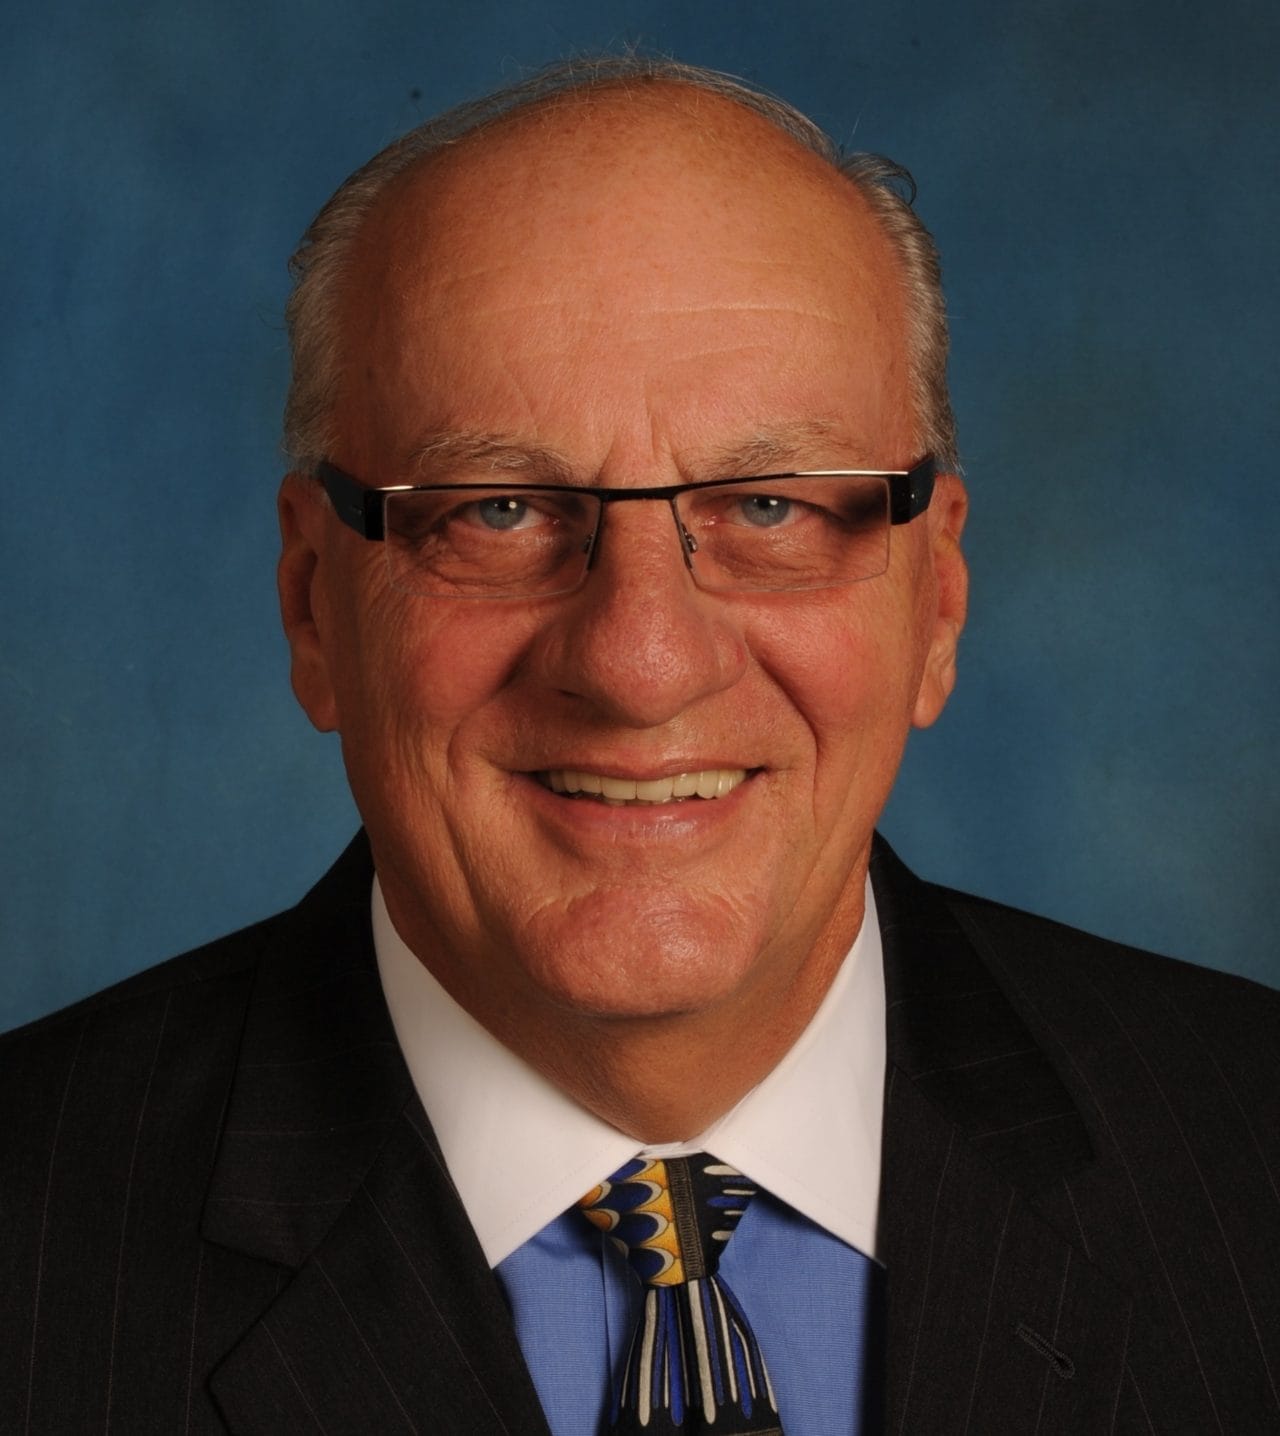 Frank Ortis is the mayor of the City of Pembroke Pines in Broward County.